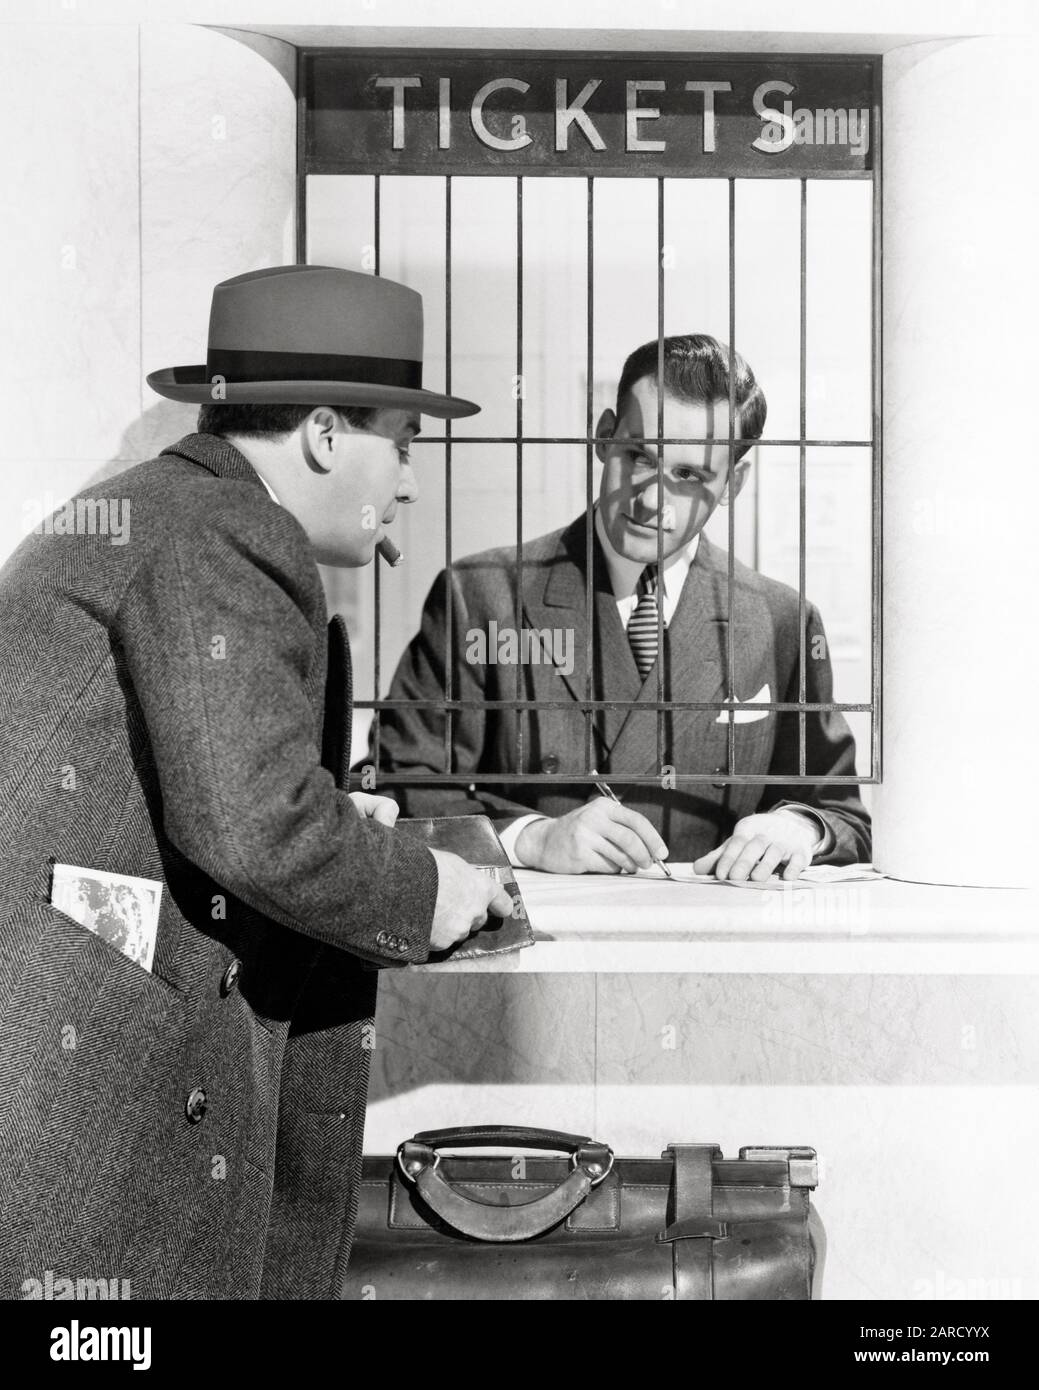 1930s 1940s 1950s MAN BUYING TICKET AT WINDOW IN BUS OR RAILROAD TRAIN STATION - asp x10847 CAM001 HARS RAILROAD TICKETS CLERK TICKET JOBS PASSENGER COPY SPACE HALF-LENGTH PERSONS MALES TRANSPORTATION B&W RUSH RAIL SUIT AND TIE OCCUPATION SELLING CUSTOMER SERVICE OVERCOAT EXCITEMENT CAM001 LABOR SELLER EMPLOYMENT OCCUPATIONS TRAVELING BUYER RAILROADS EMPLOYEE FARE OR PURCHASING MID-ADULT MID-ADULT MAN SALESMEN TRAVELER AGENT BLACK AND WHITE CAUCASIAN ETHNICITY HURRY LABORING OLD FASHIONED Stock Photo